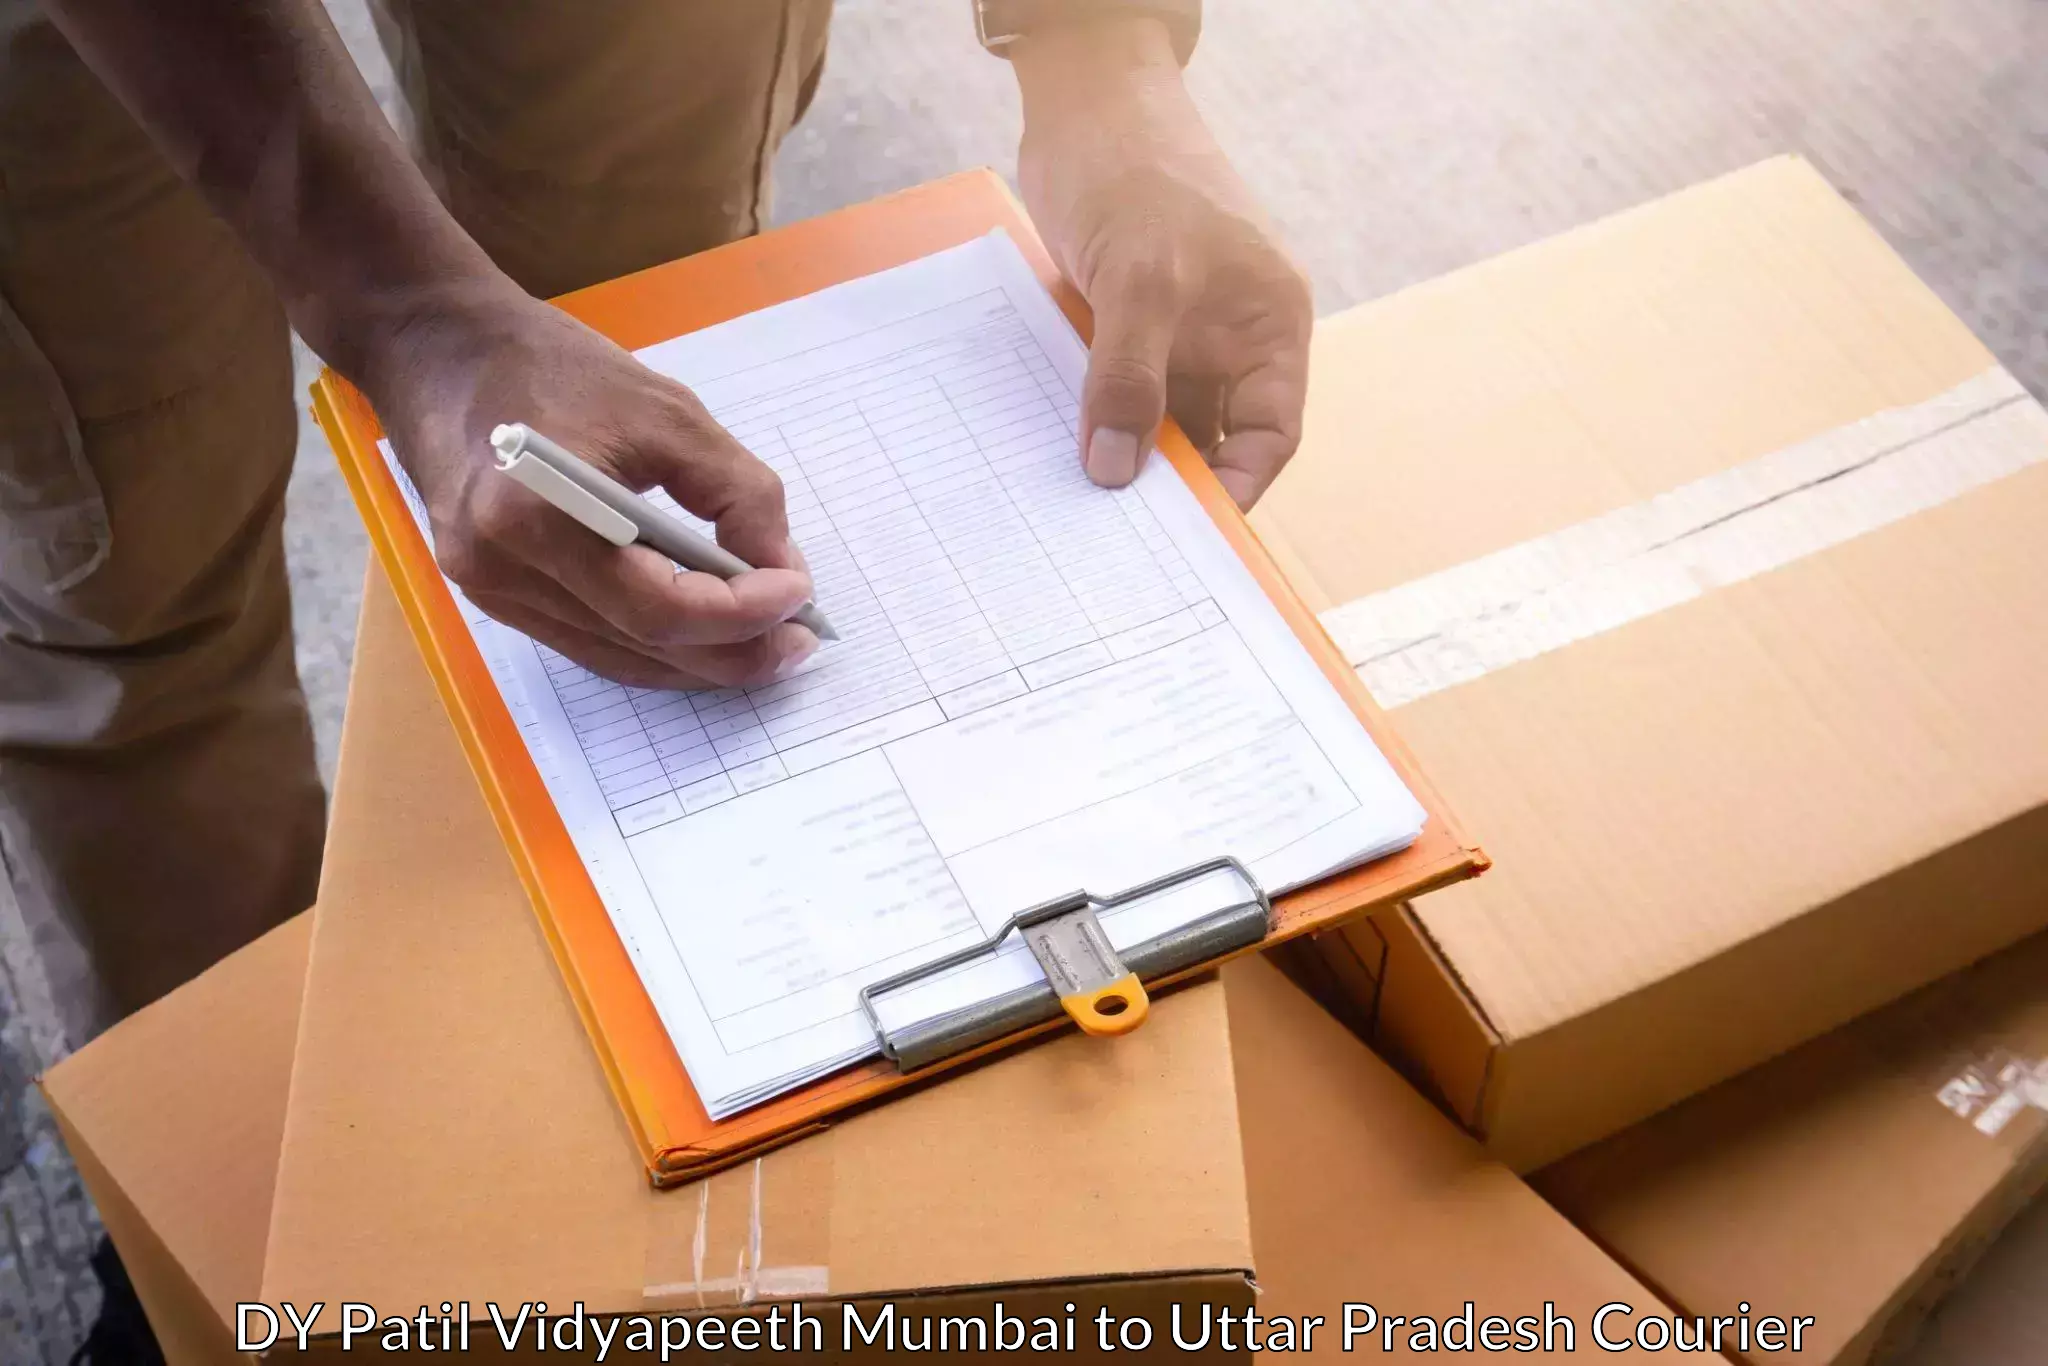 Professional delivery solutions in DY Patil Vidyapeeth Mumbai to Prayagraj